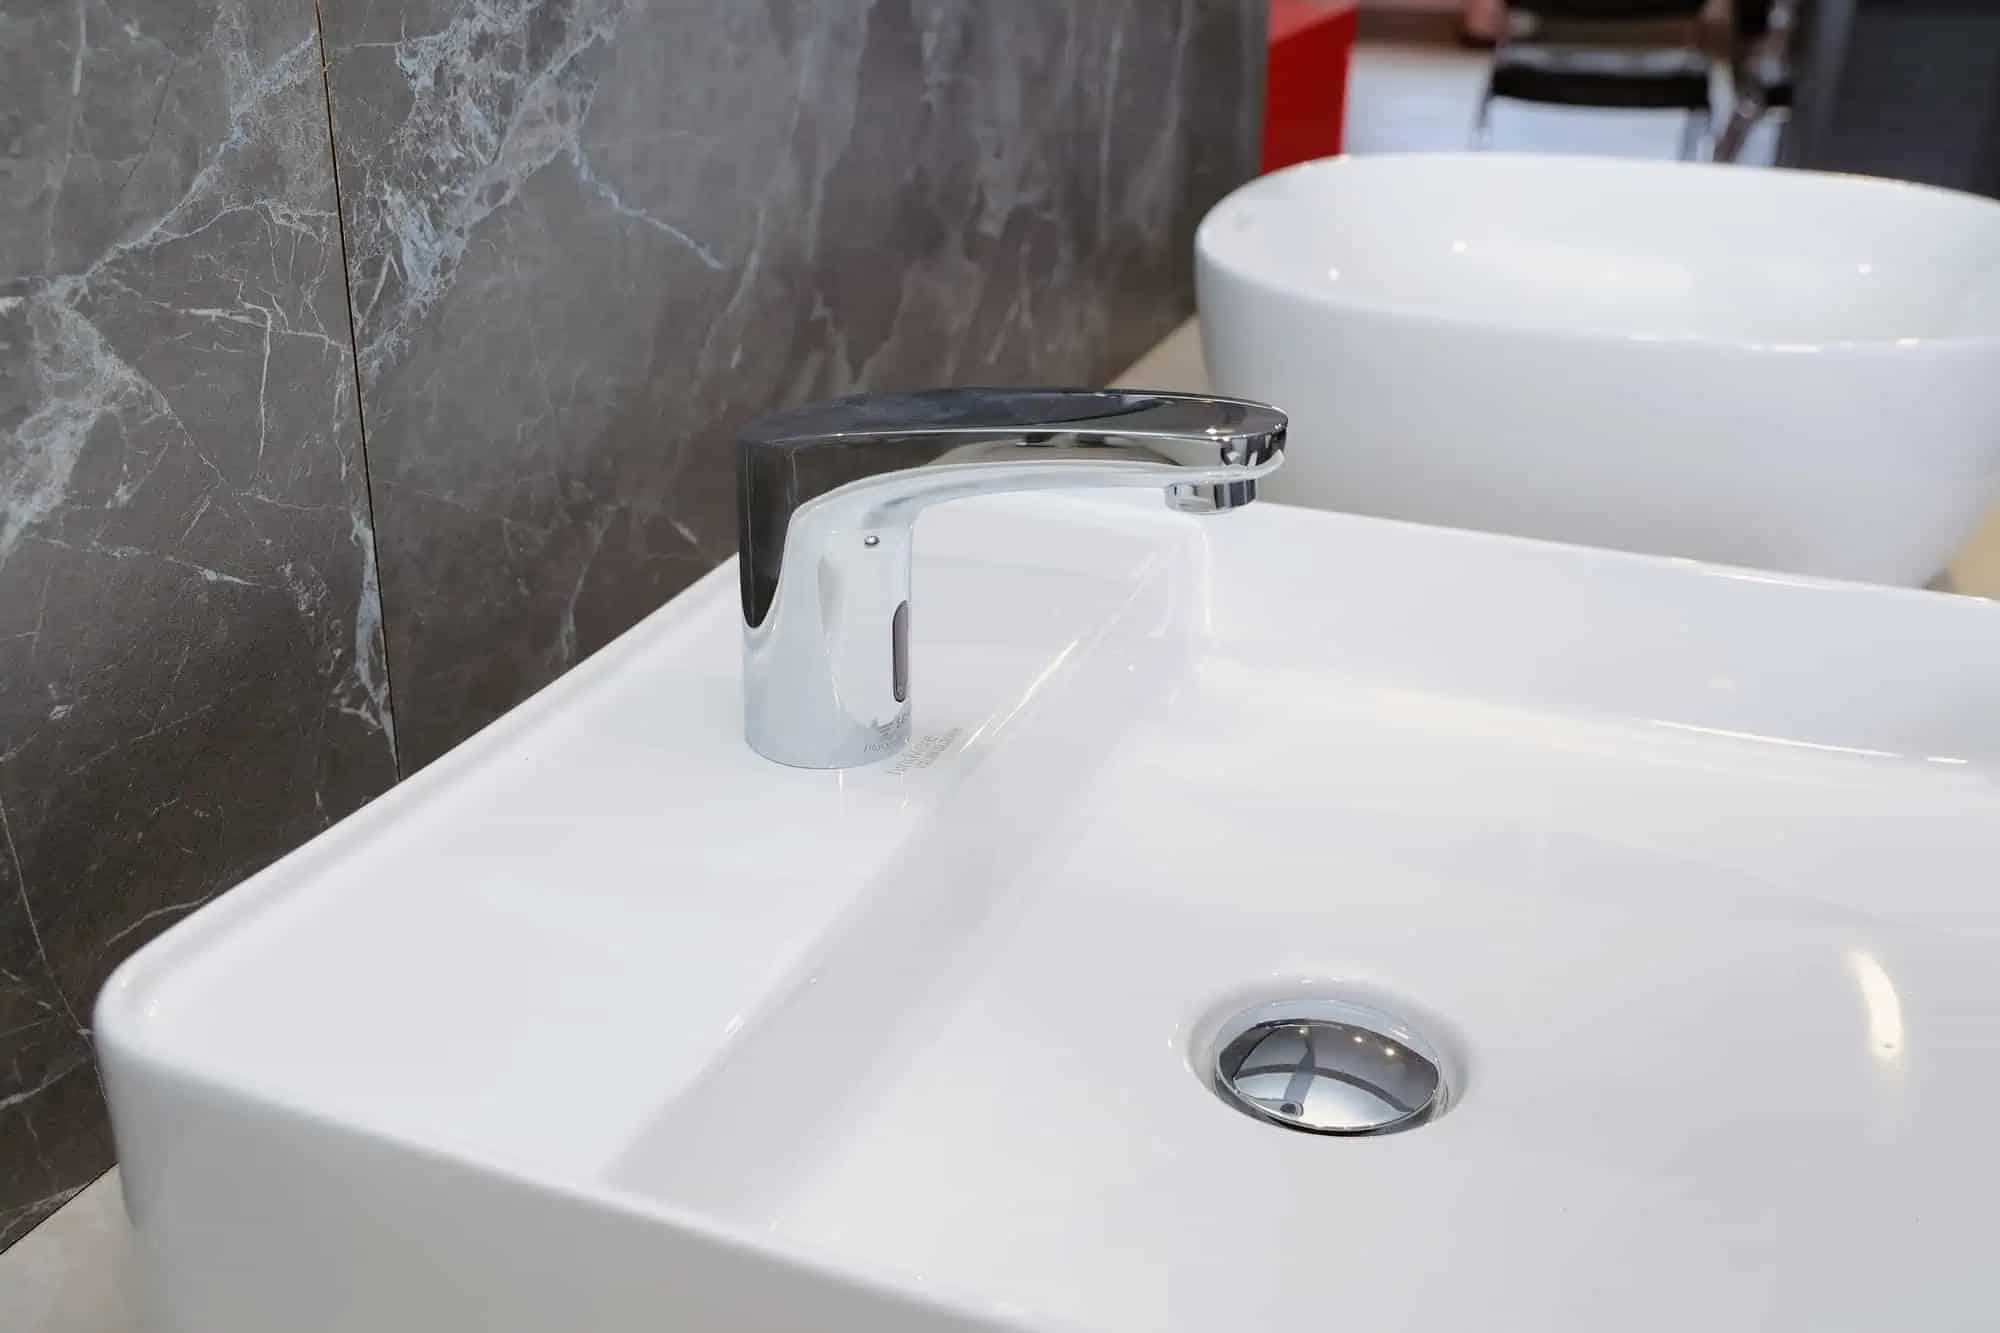 Sensor toucchless faucet and taps from SCHELL for public facilities